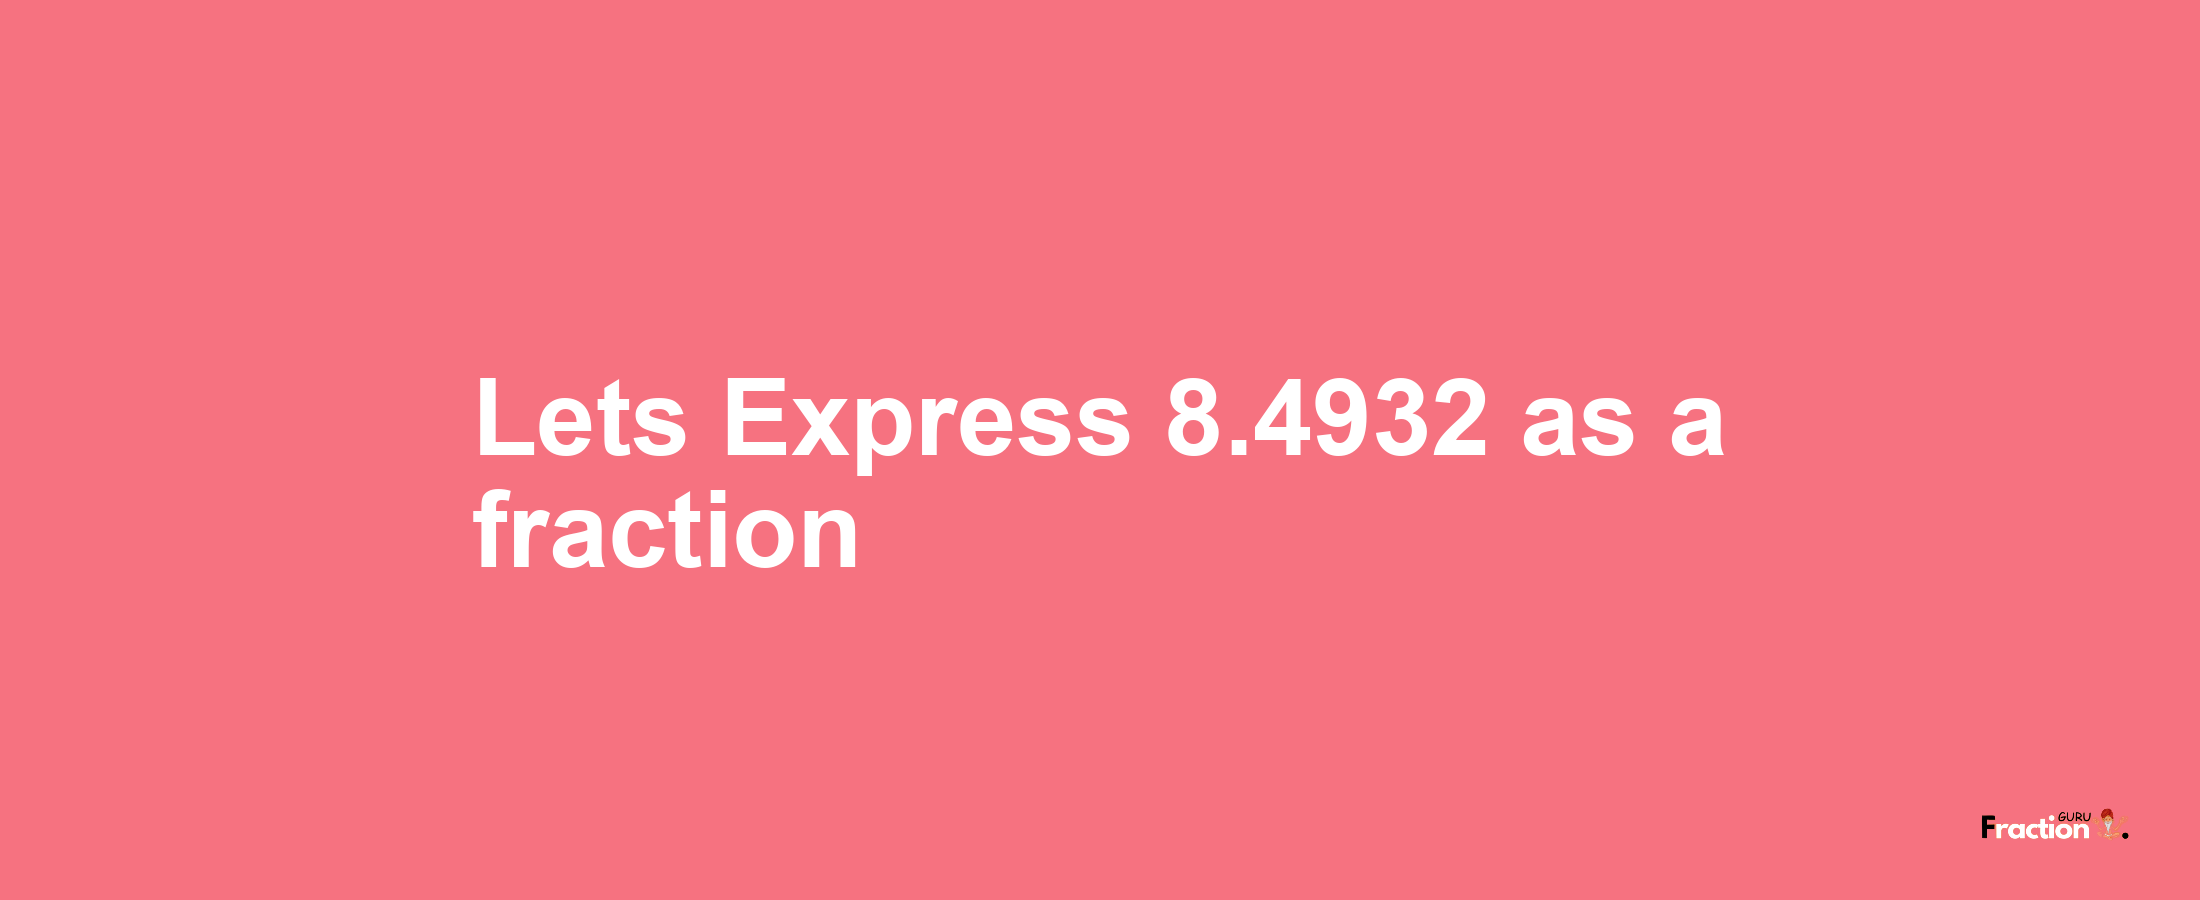 Lets Express 8.4932 as afraction